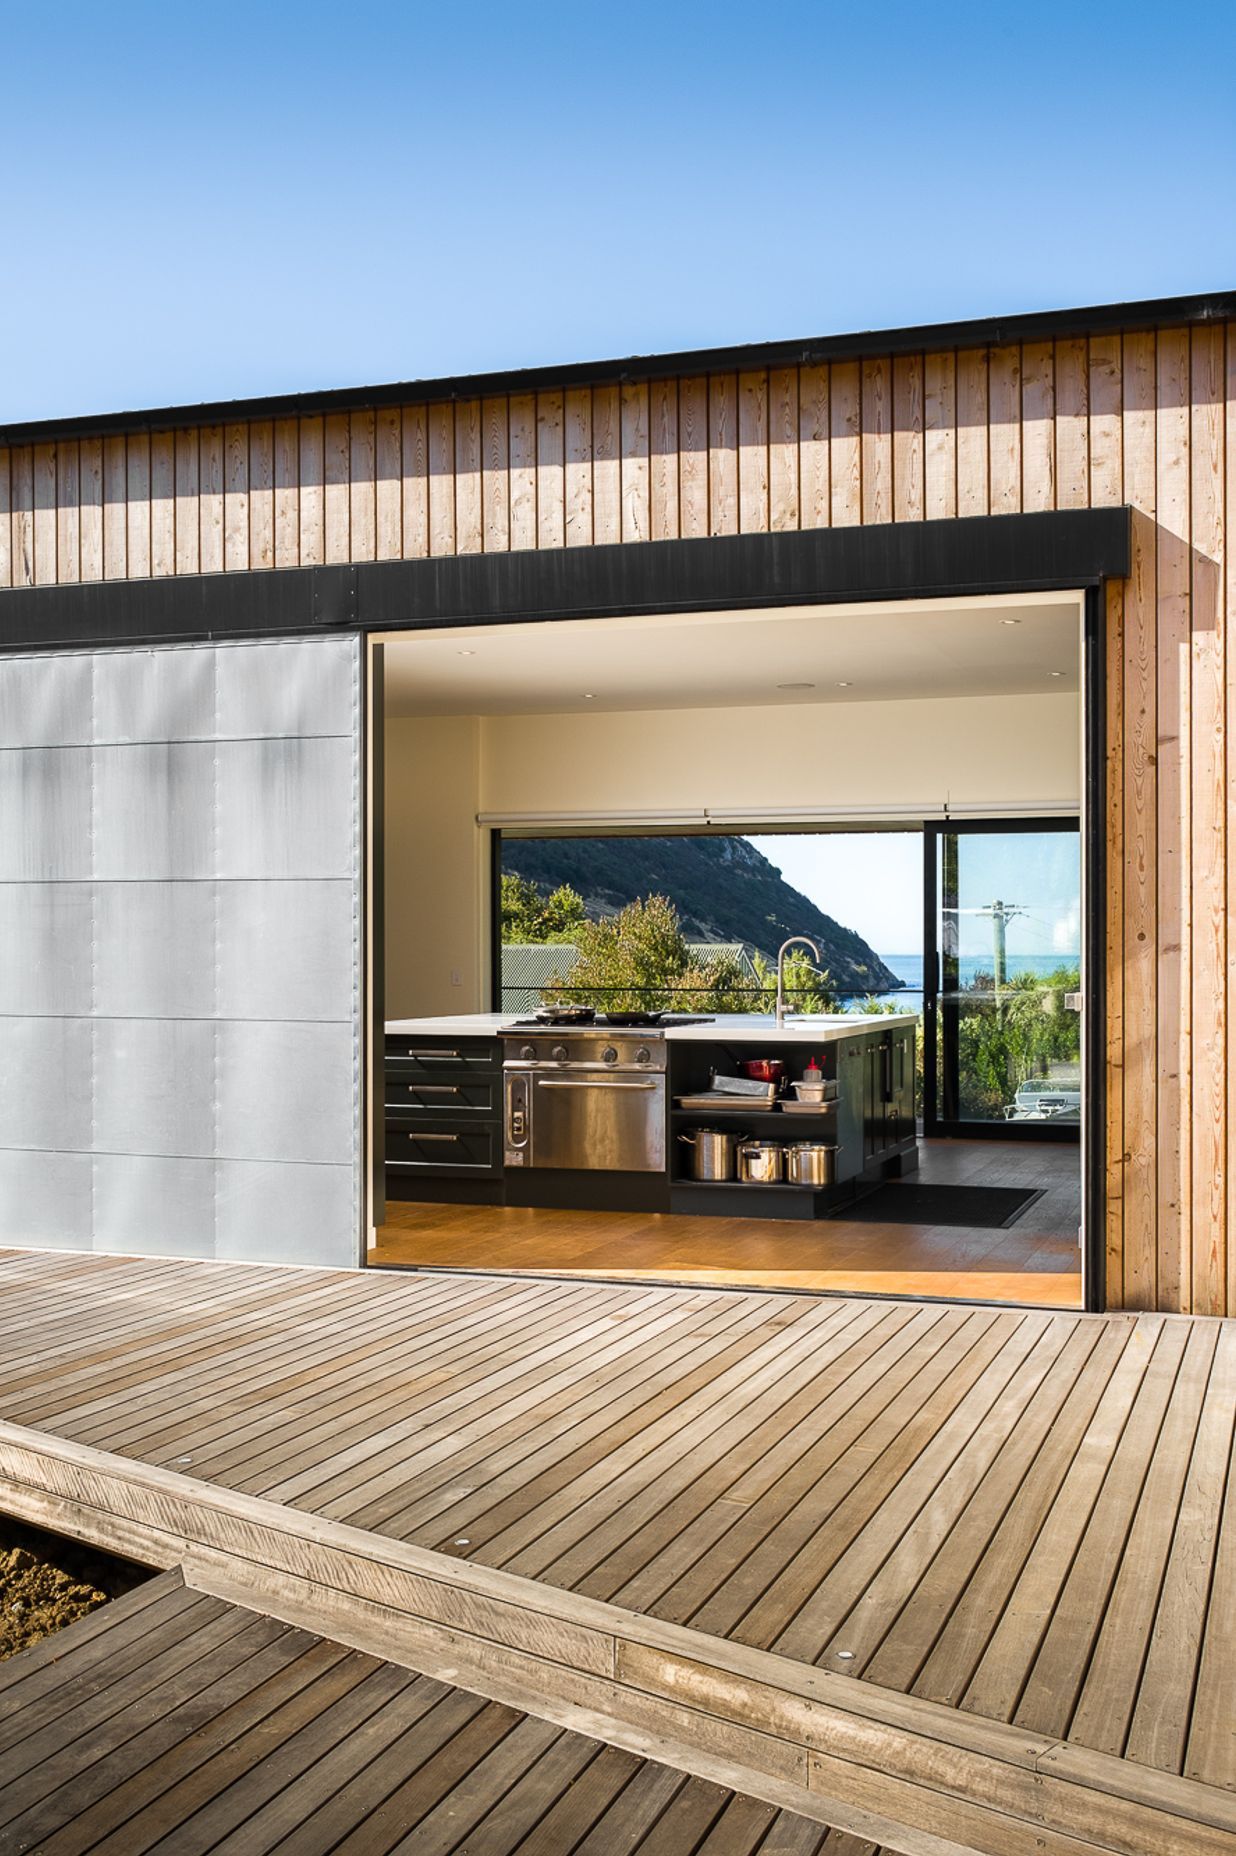 The industrial door opens up the 'evening' deck to a view of the ocean.